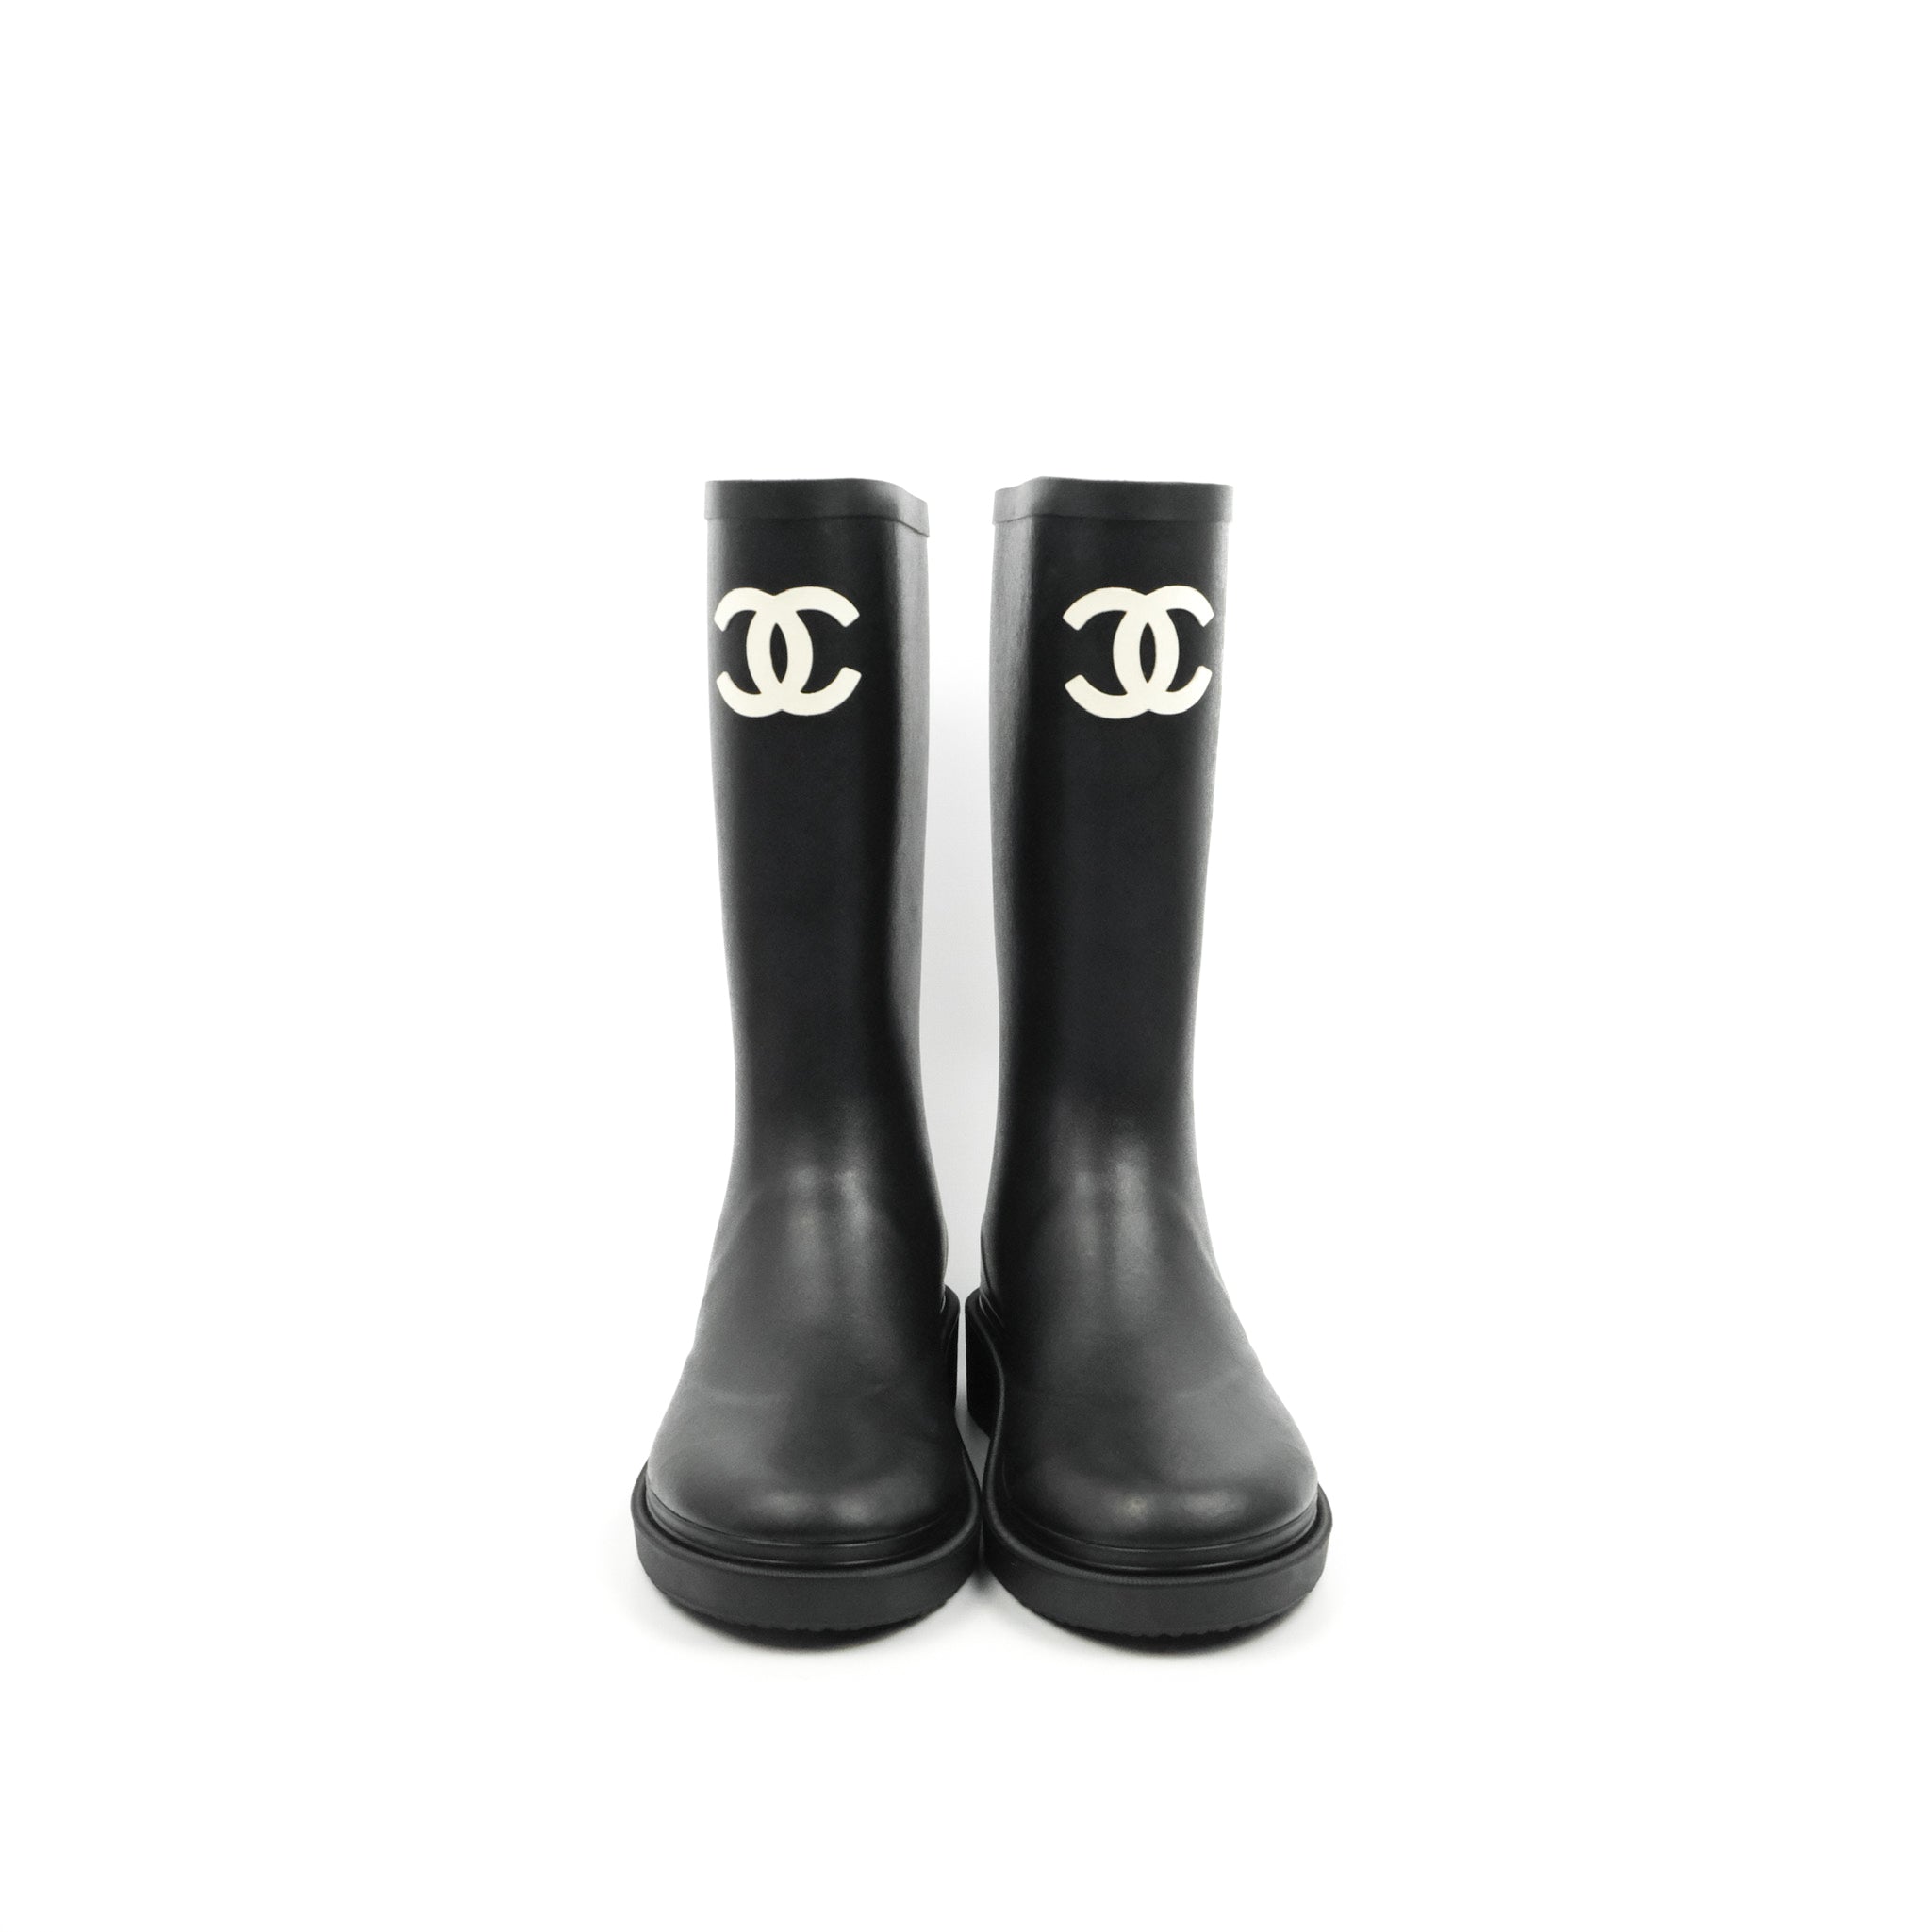 Sold at Auction: Chanel tall black boot